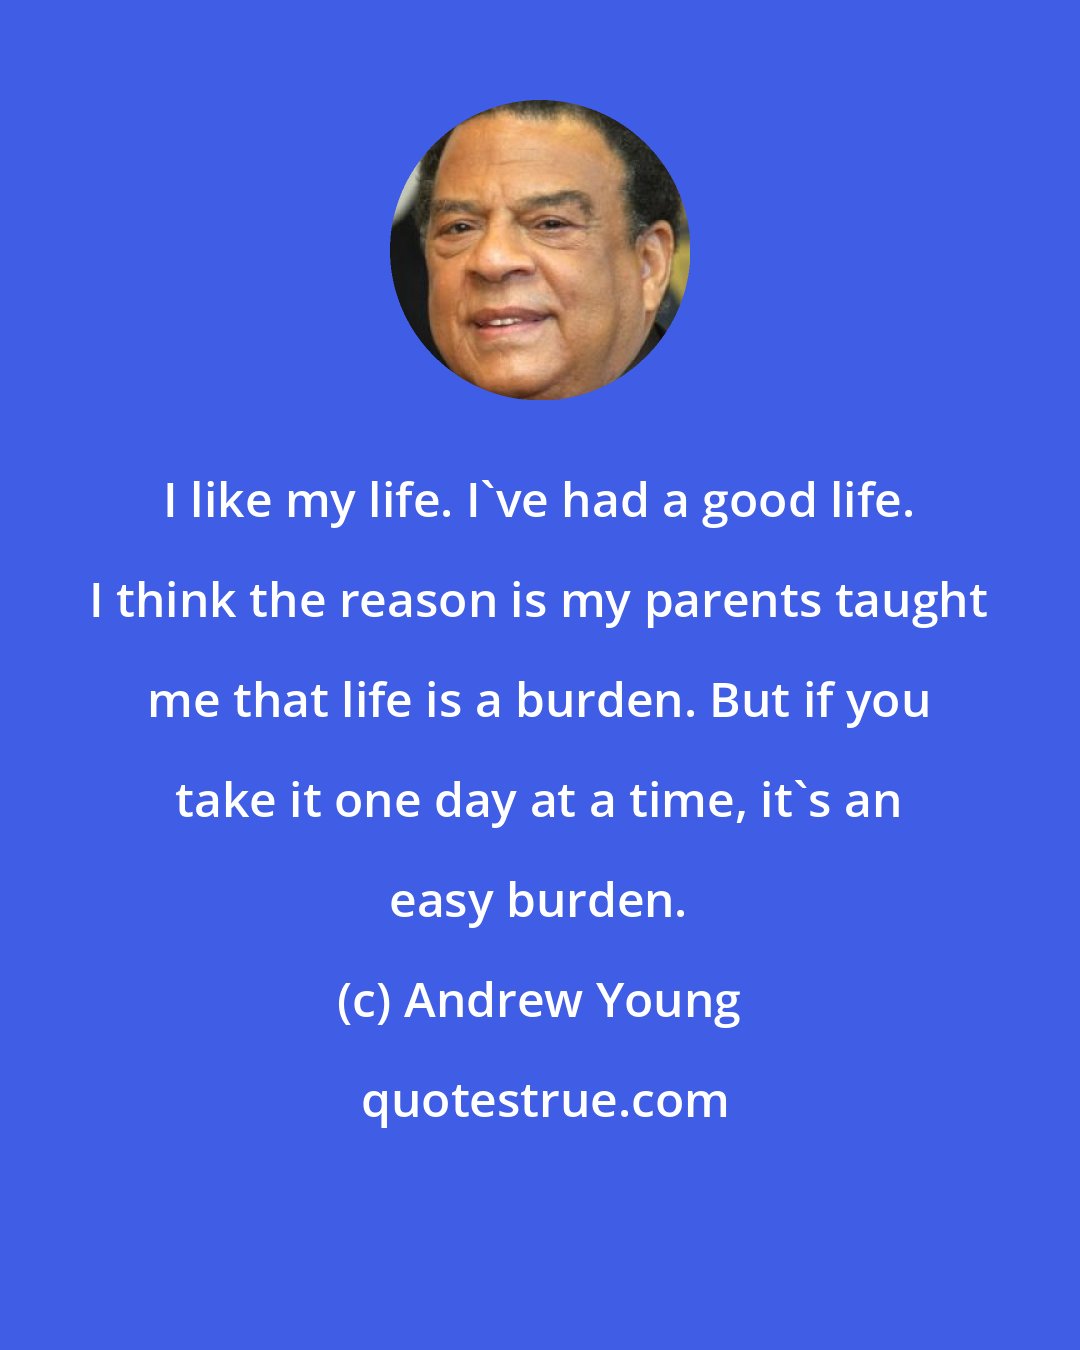 Andrew Young: I like my life. I've had a good life. I think the reason is my parents taught me that life is a burden. But if you take it one day at a time, it's an easy burden.